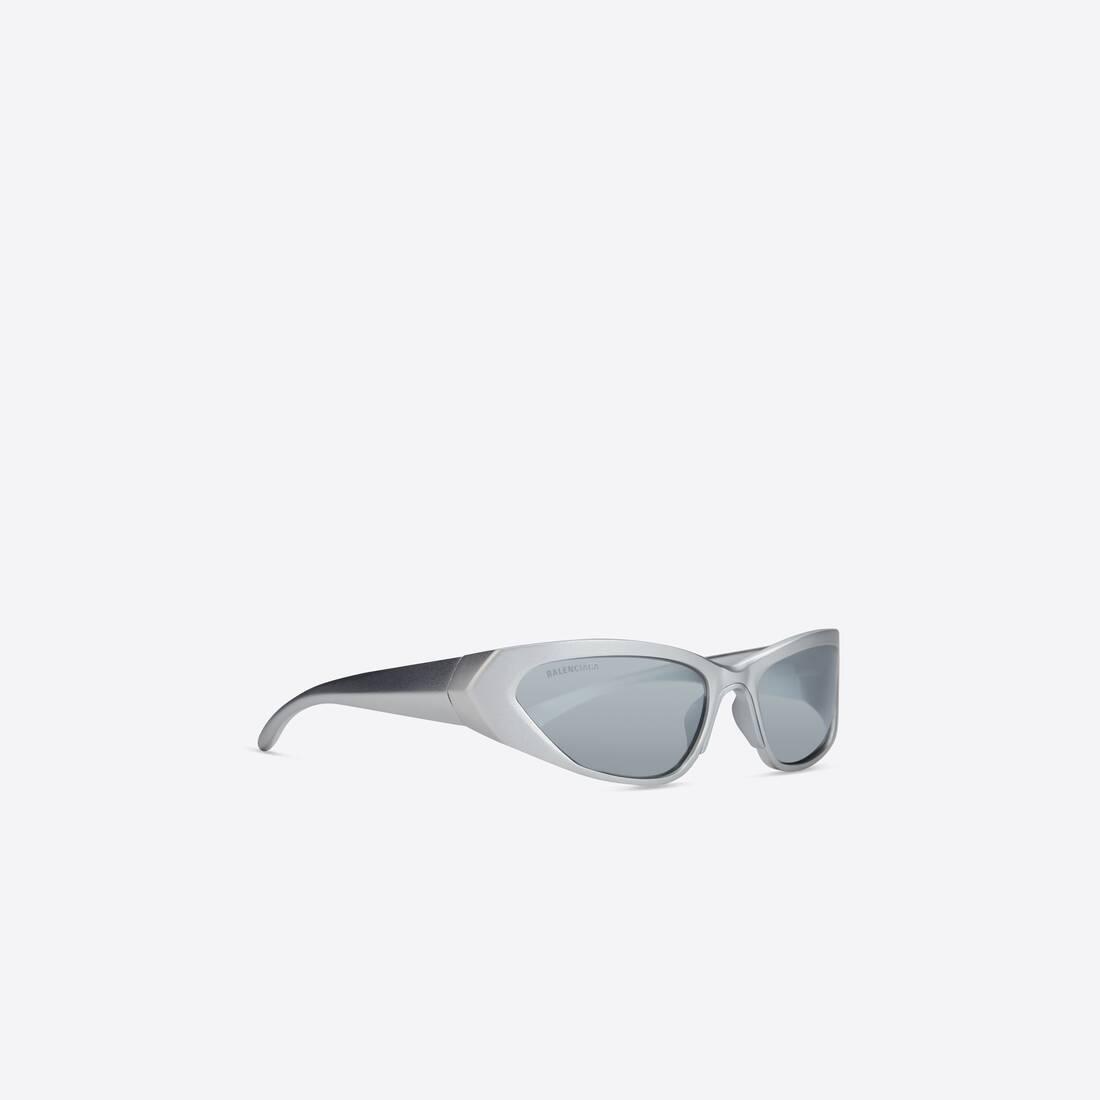 the sunglasses EVERYBODY is wearing right now balenciaga swift   xpander sunglasses  YouTube